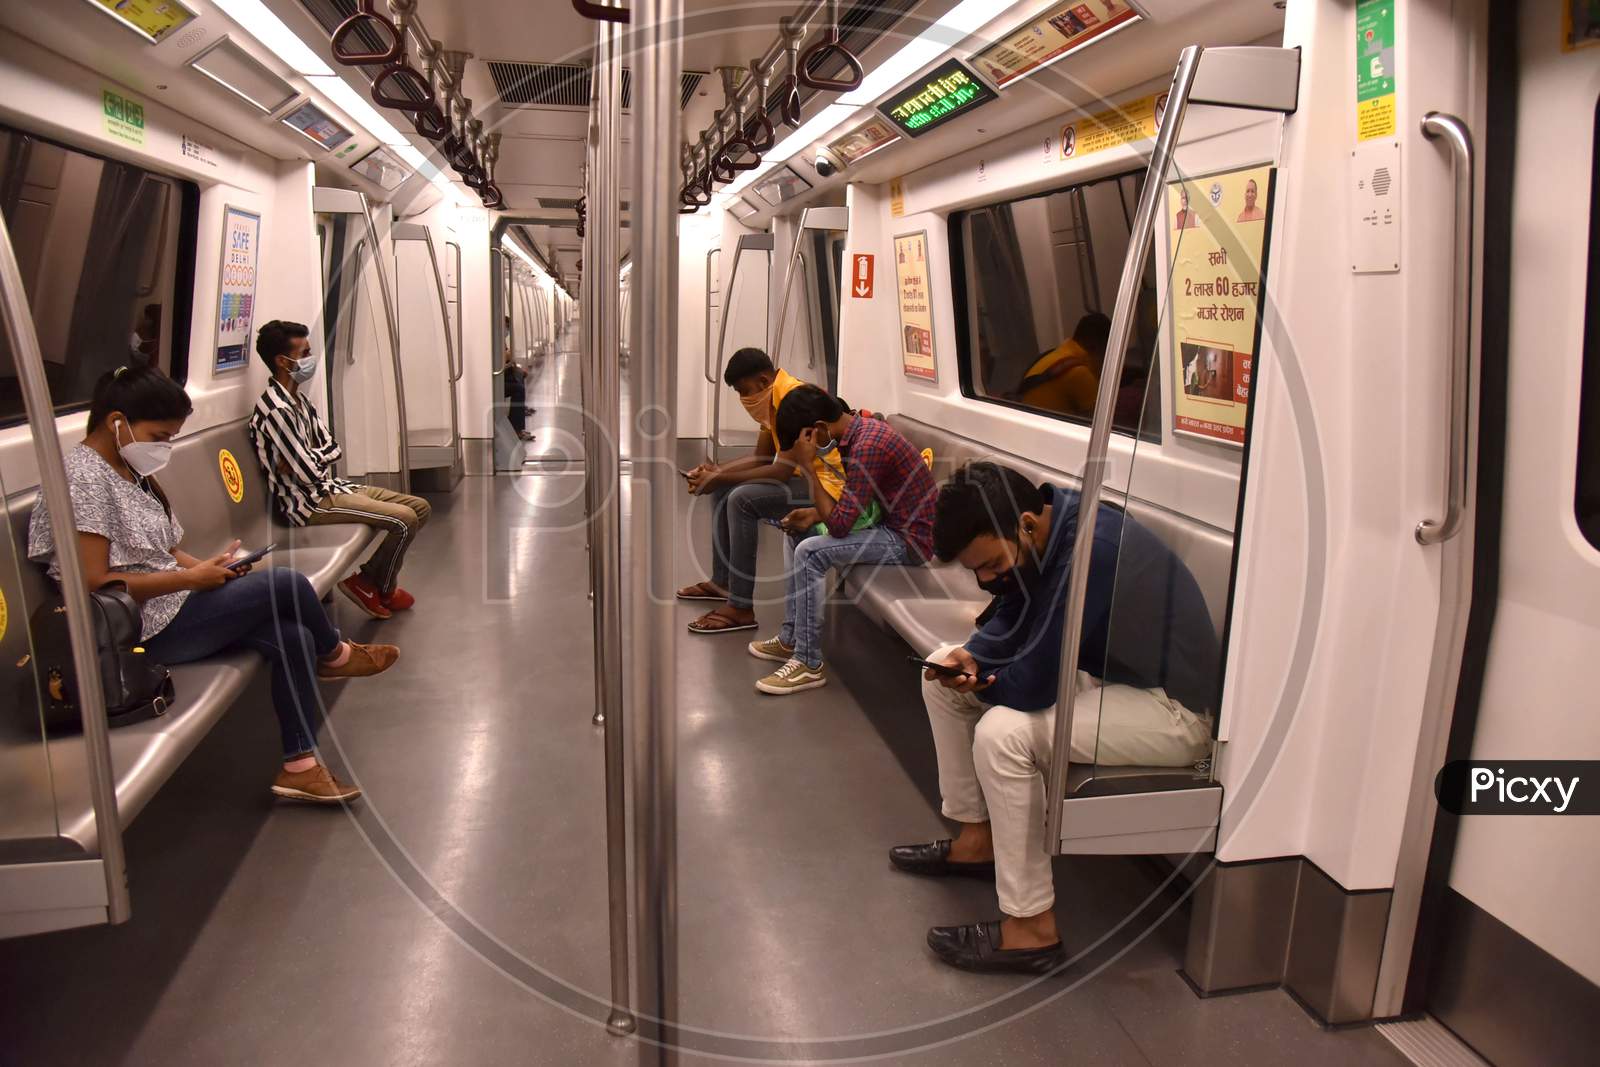 Passengers wearing face masks travel on a Delhi metro train, on the first day of the restart of their operations, amidst the spread of coronavirus disease (COVID-19), in New Delhi, India, September 7, 2020.